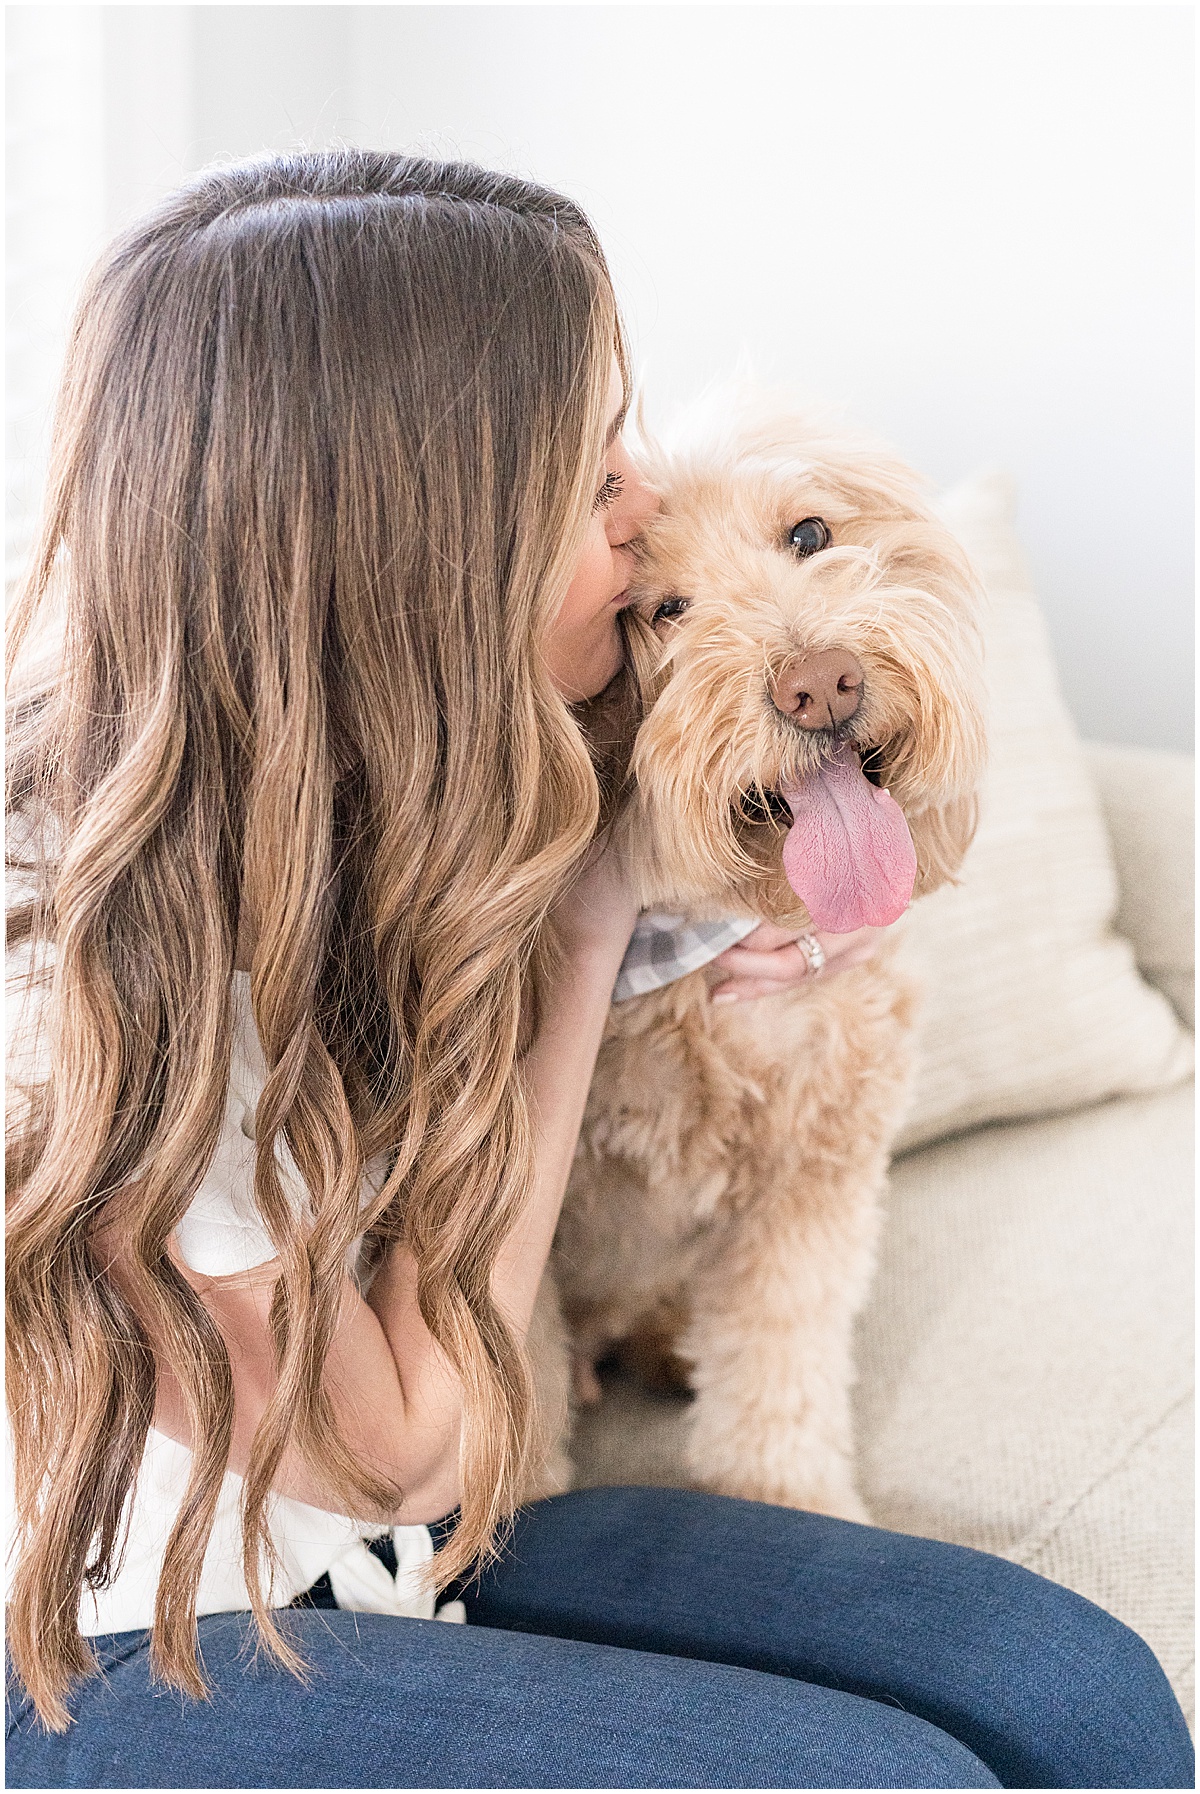 Lafayette, Indiana Hairstylist Kelli Taylor with her goldendoodle, Mackey